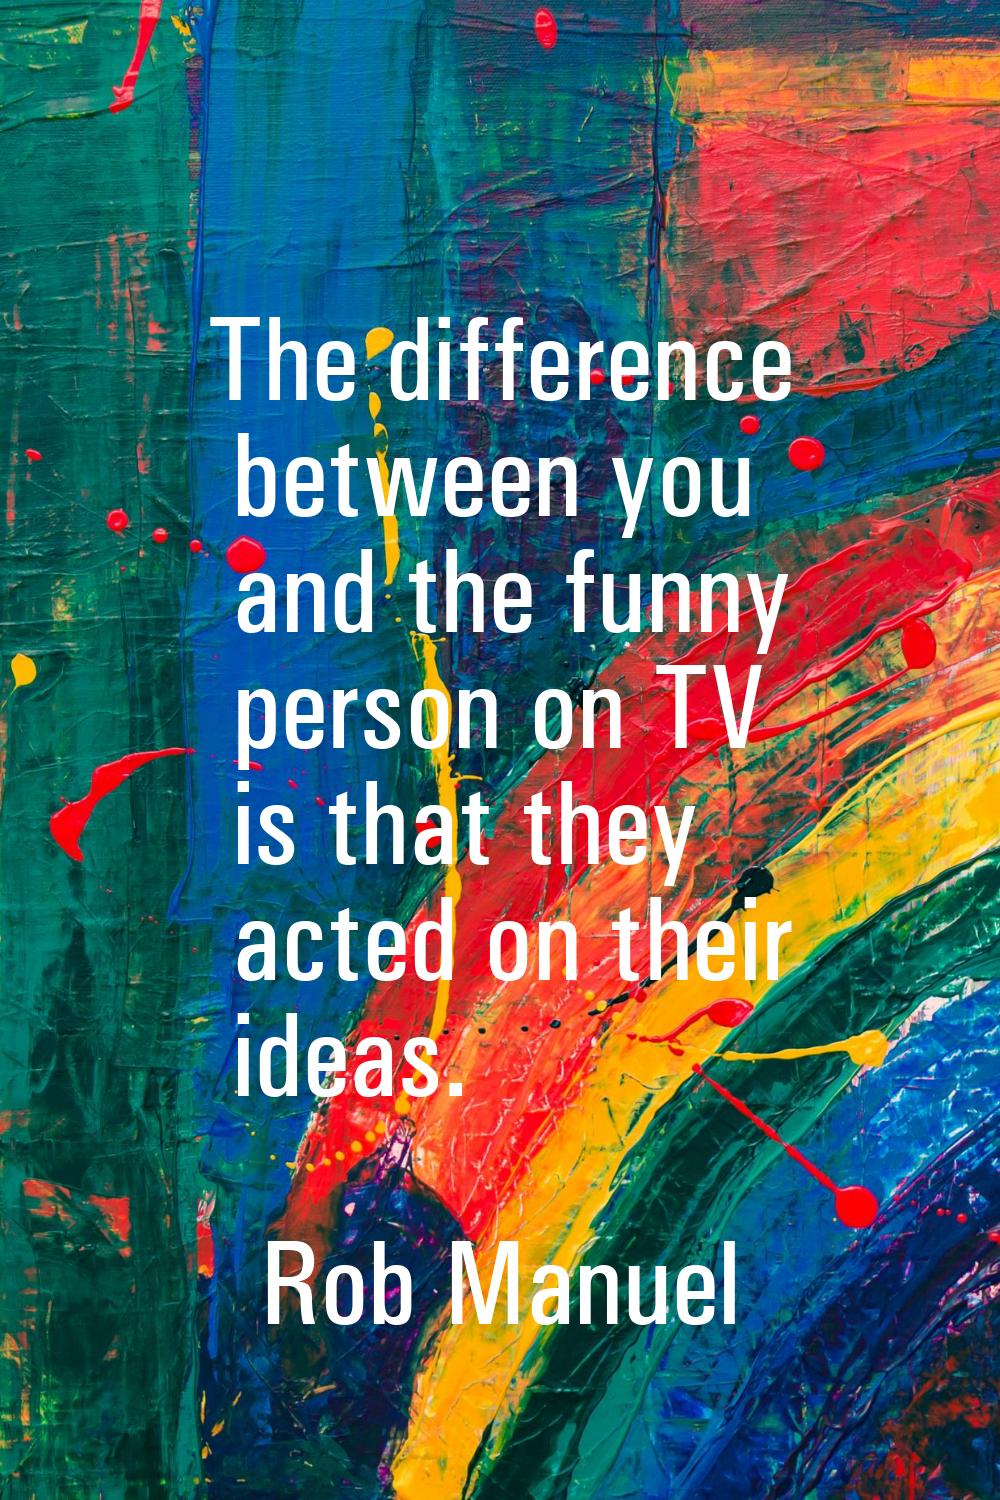 The difference between you and the funny person on TV is that they acted on their ideas.